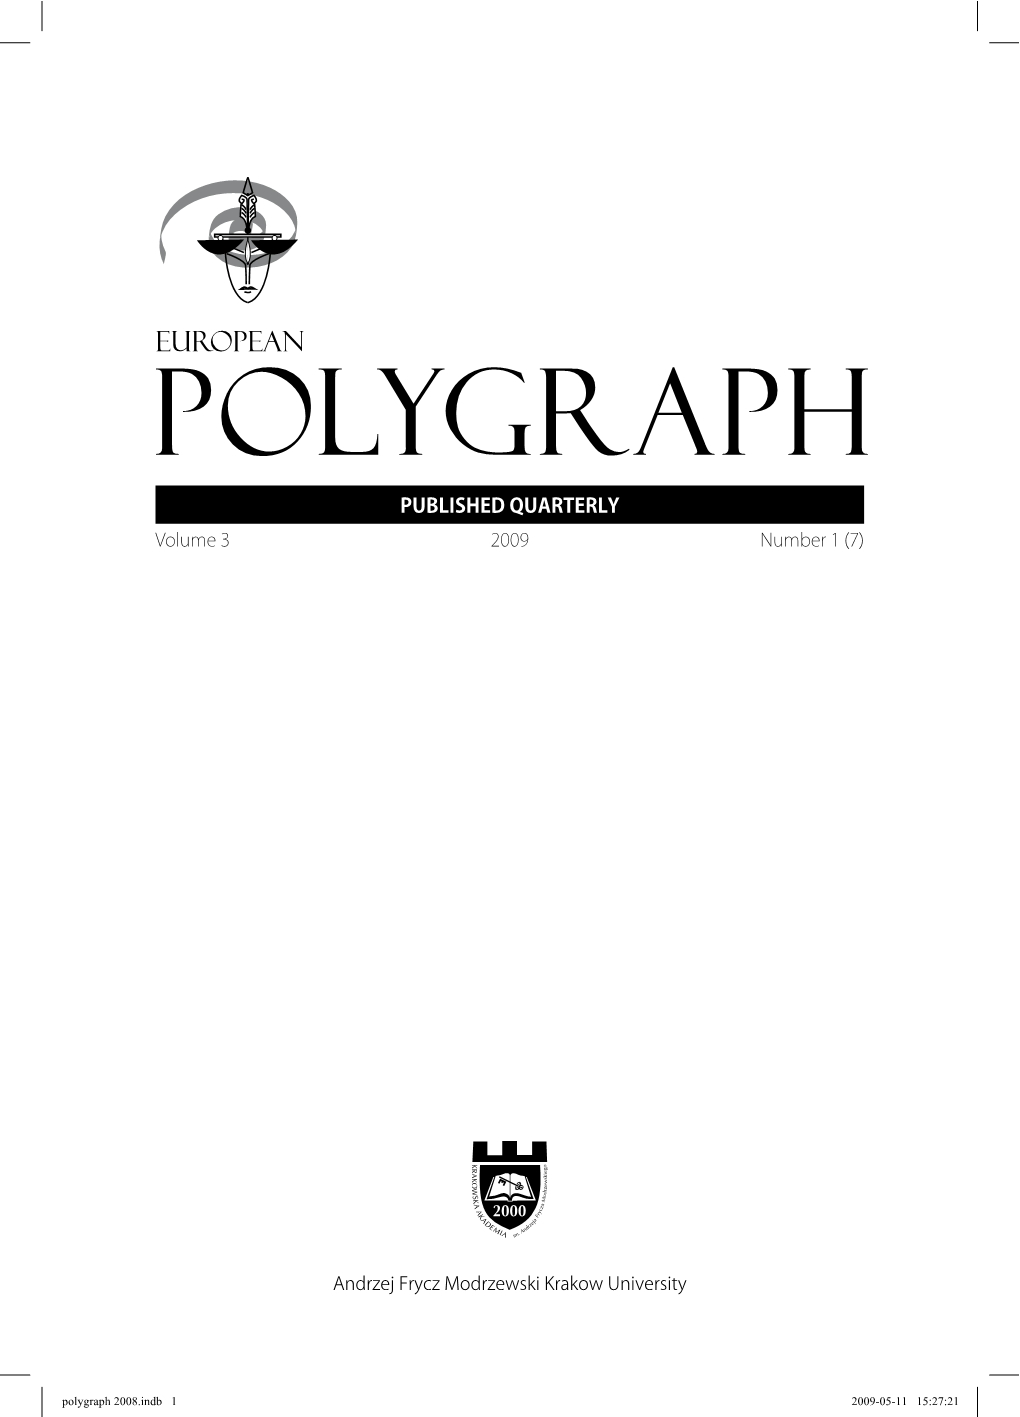 Antagonistic polygraph examination by Ryszard Jaworski Cover Image